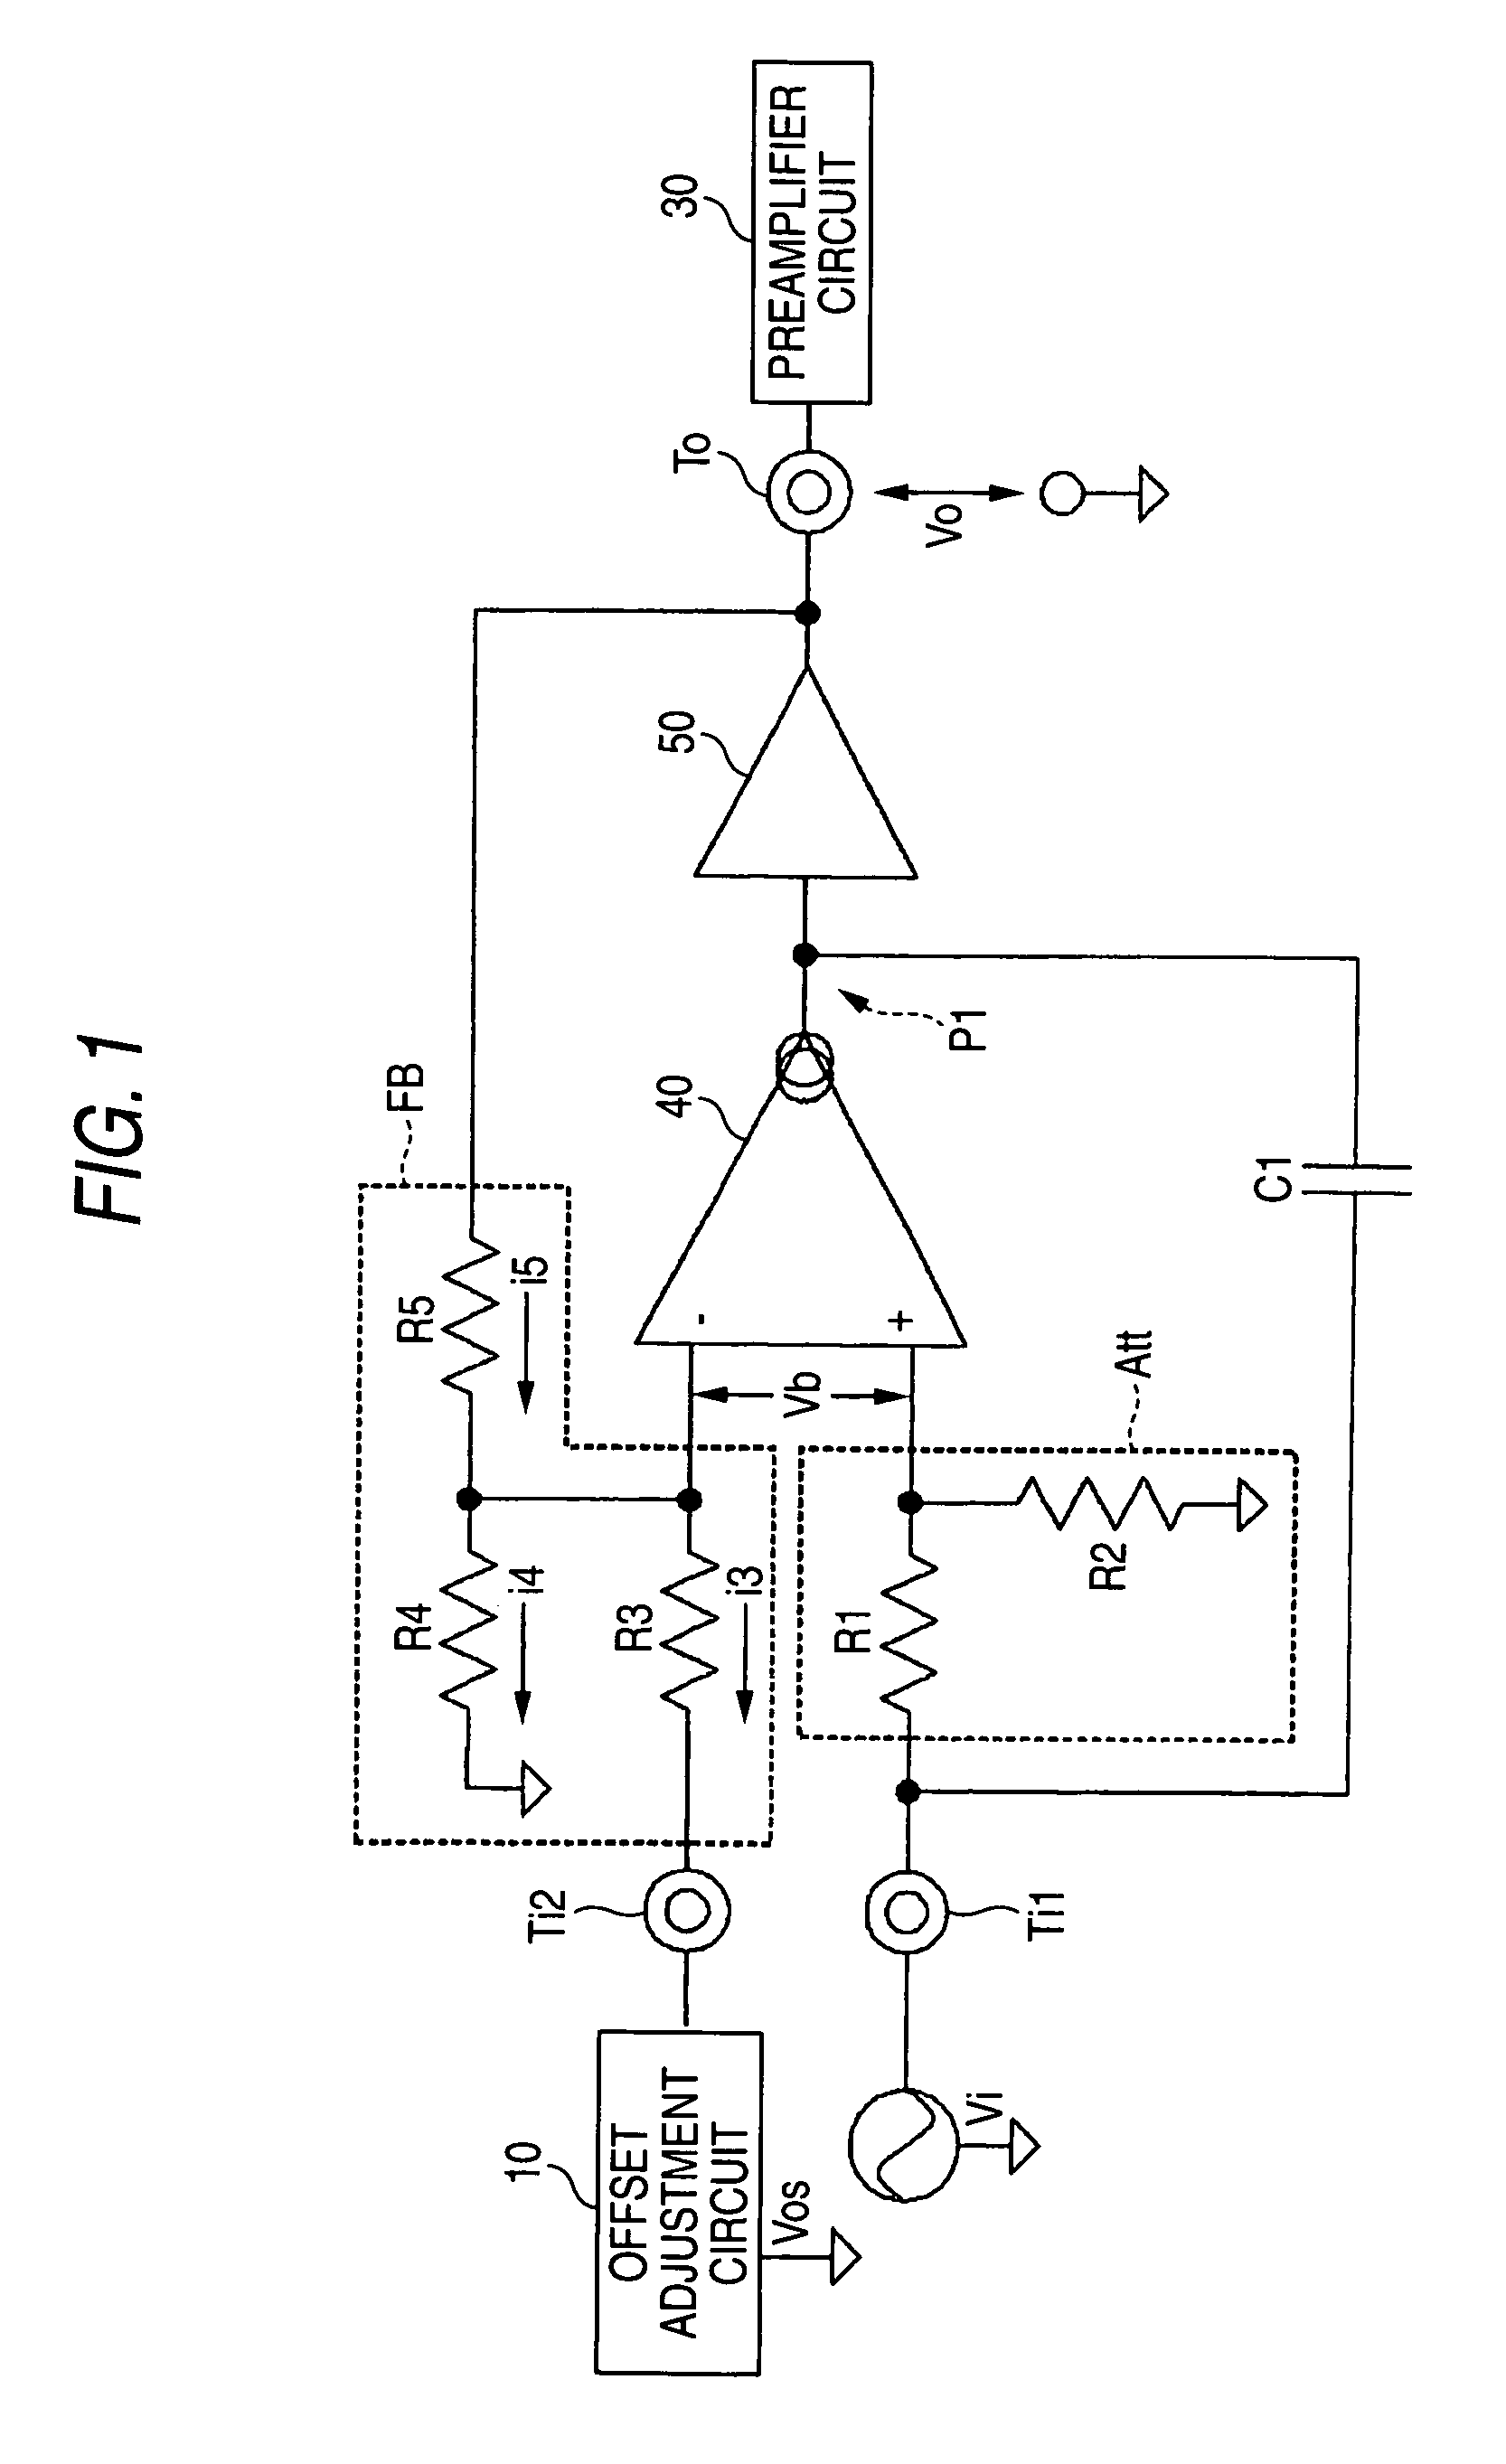 Differential amplification input circuit